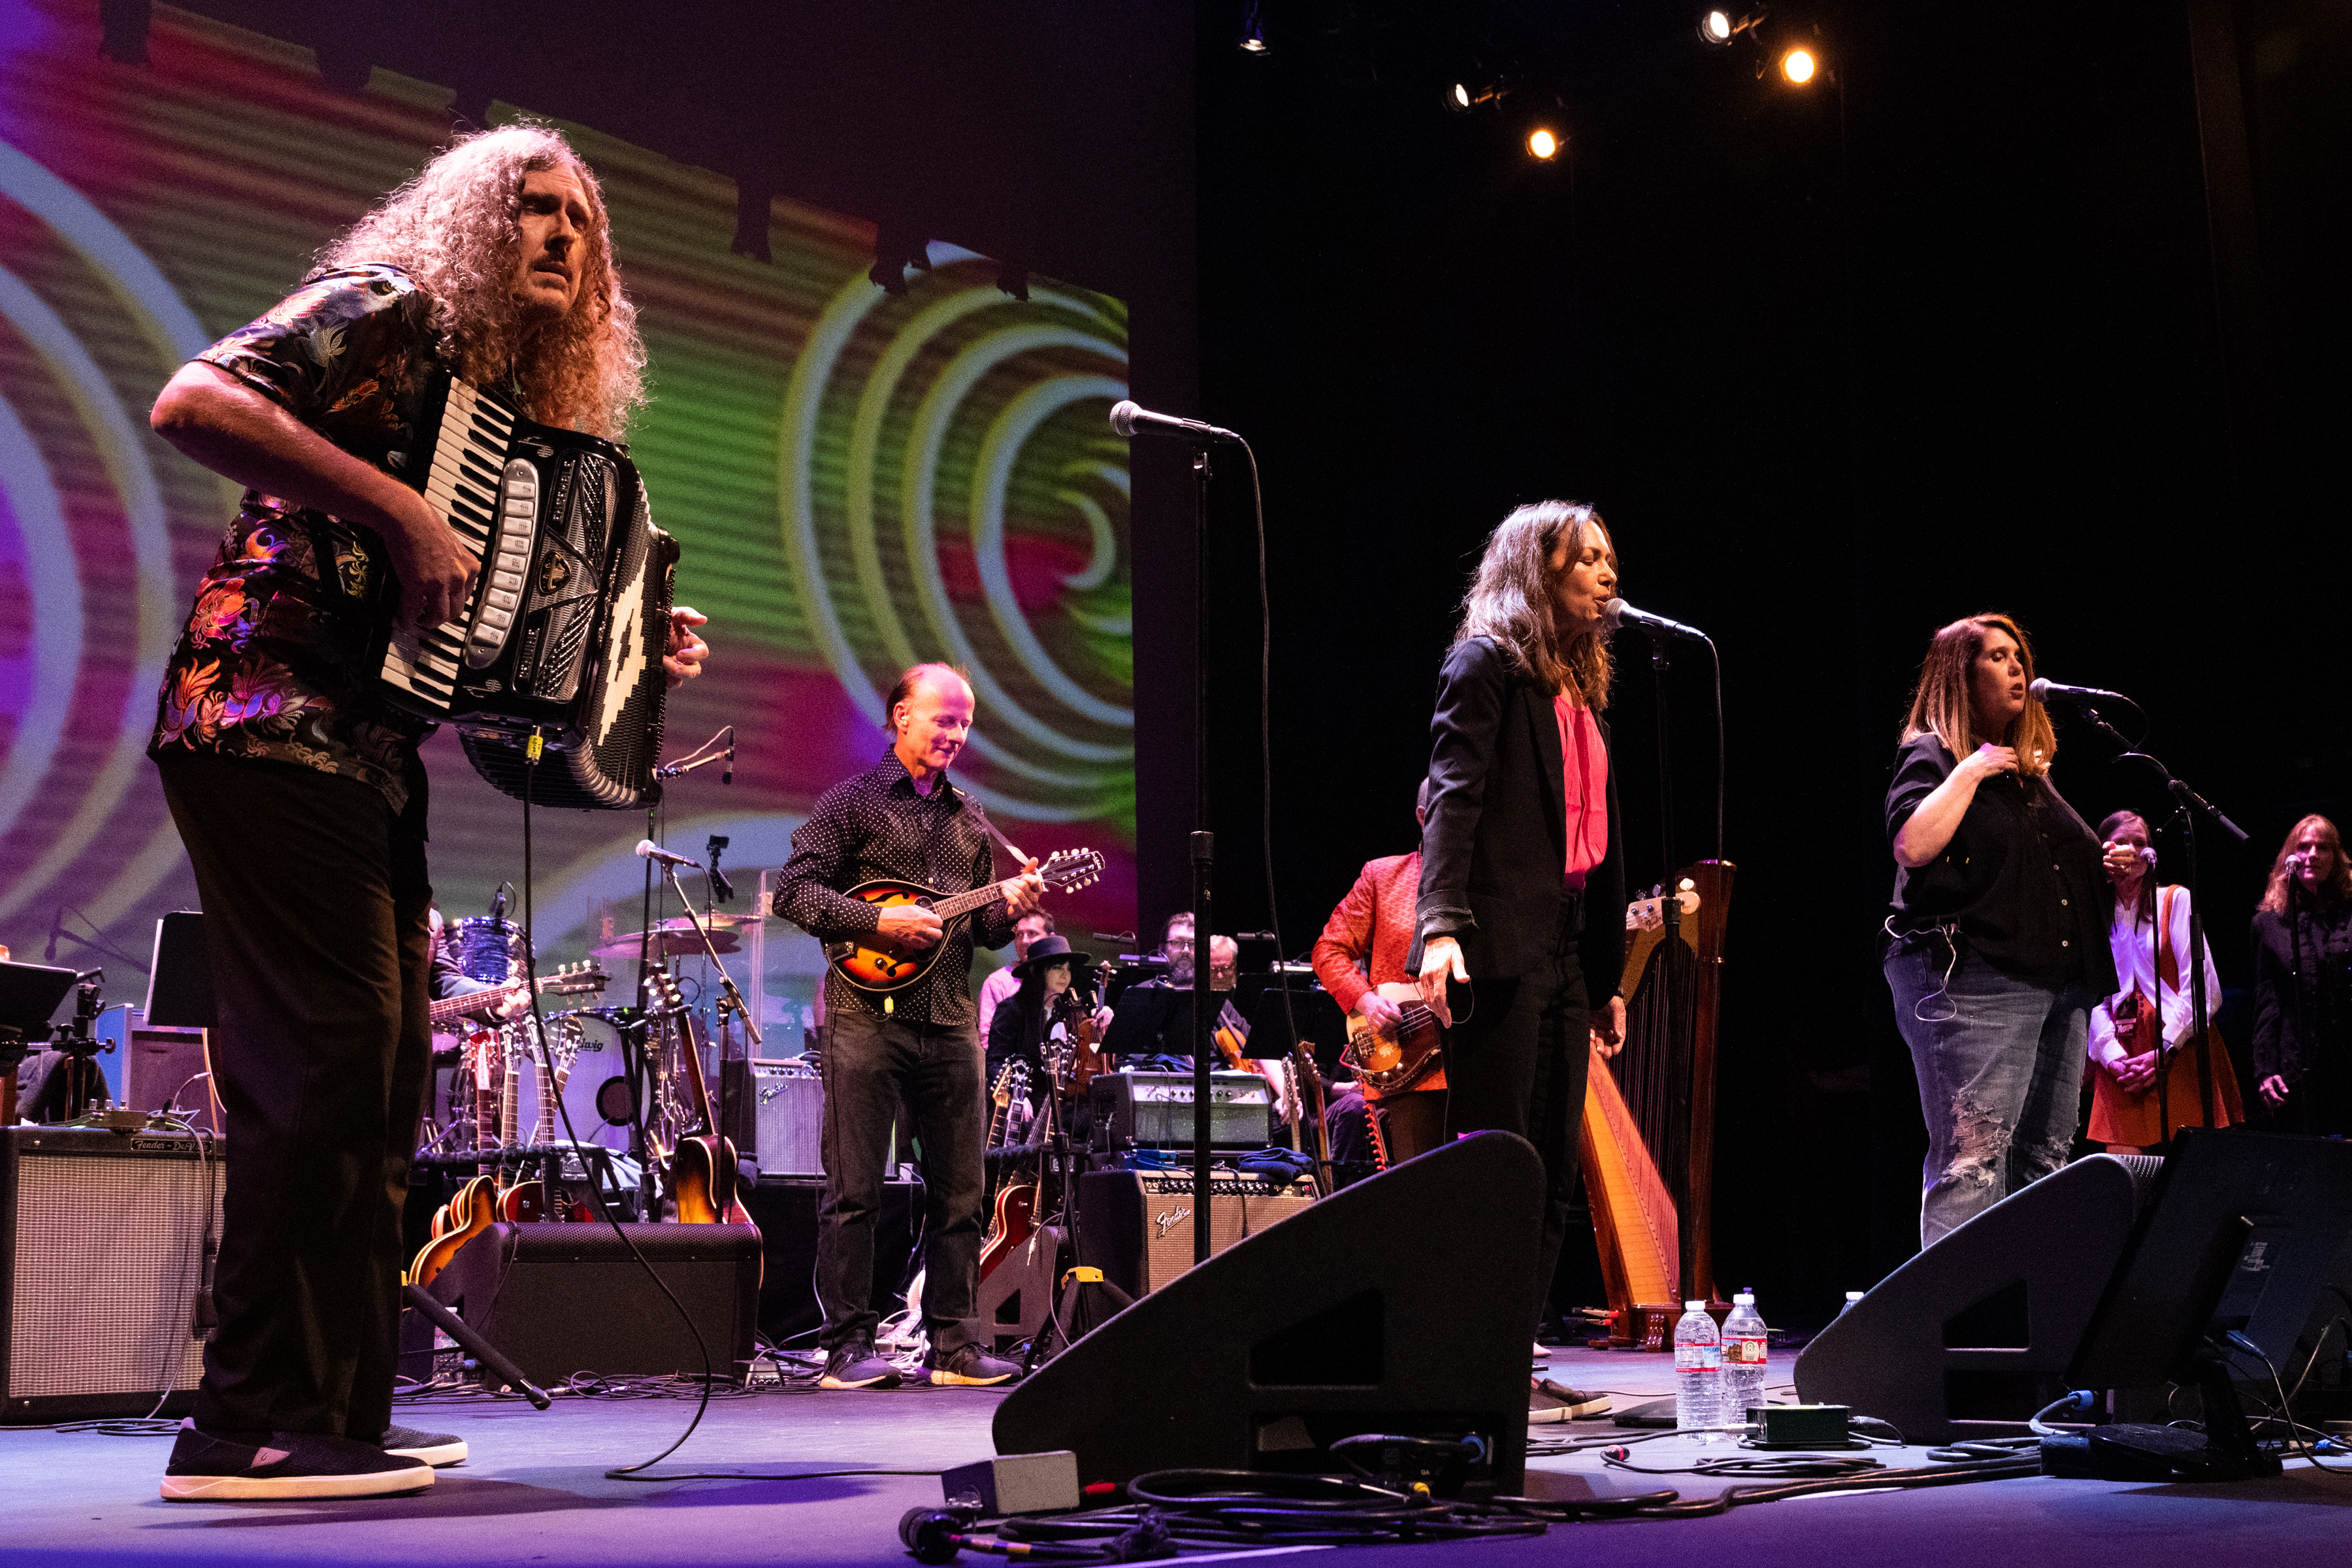 Musicians Weird Al Yankovic (L), Susanna Hoffs (C), and Owen Elliot-Kugel (R) perform onstage during The Wild Honey Foundation's 50th Anniversary All-Star Celebration Of The Nuggets Compilation Album at Alex Theatre on May 19, 2023, in Glendale, California. | Source: Getty Images